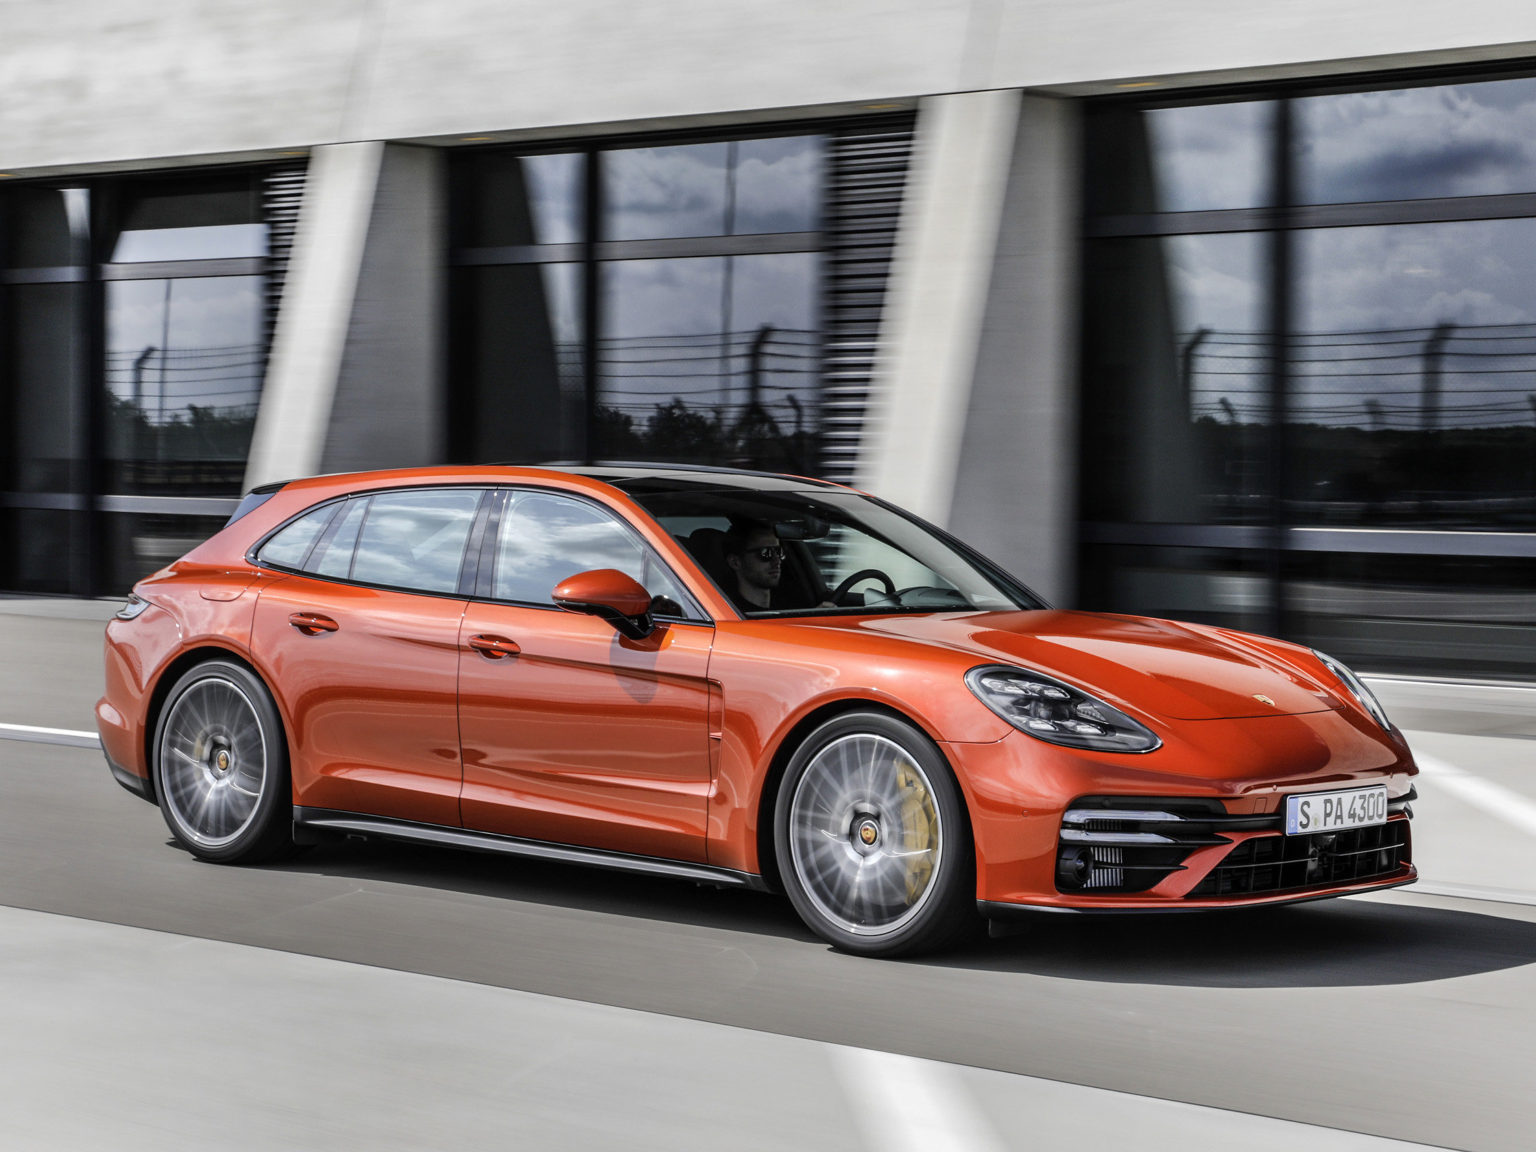 Porsche has given the Panamera a generational makeover for 2021.